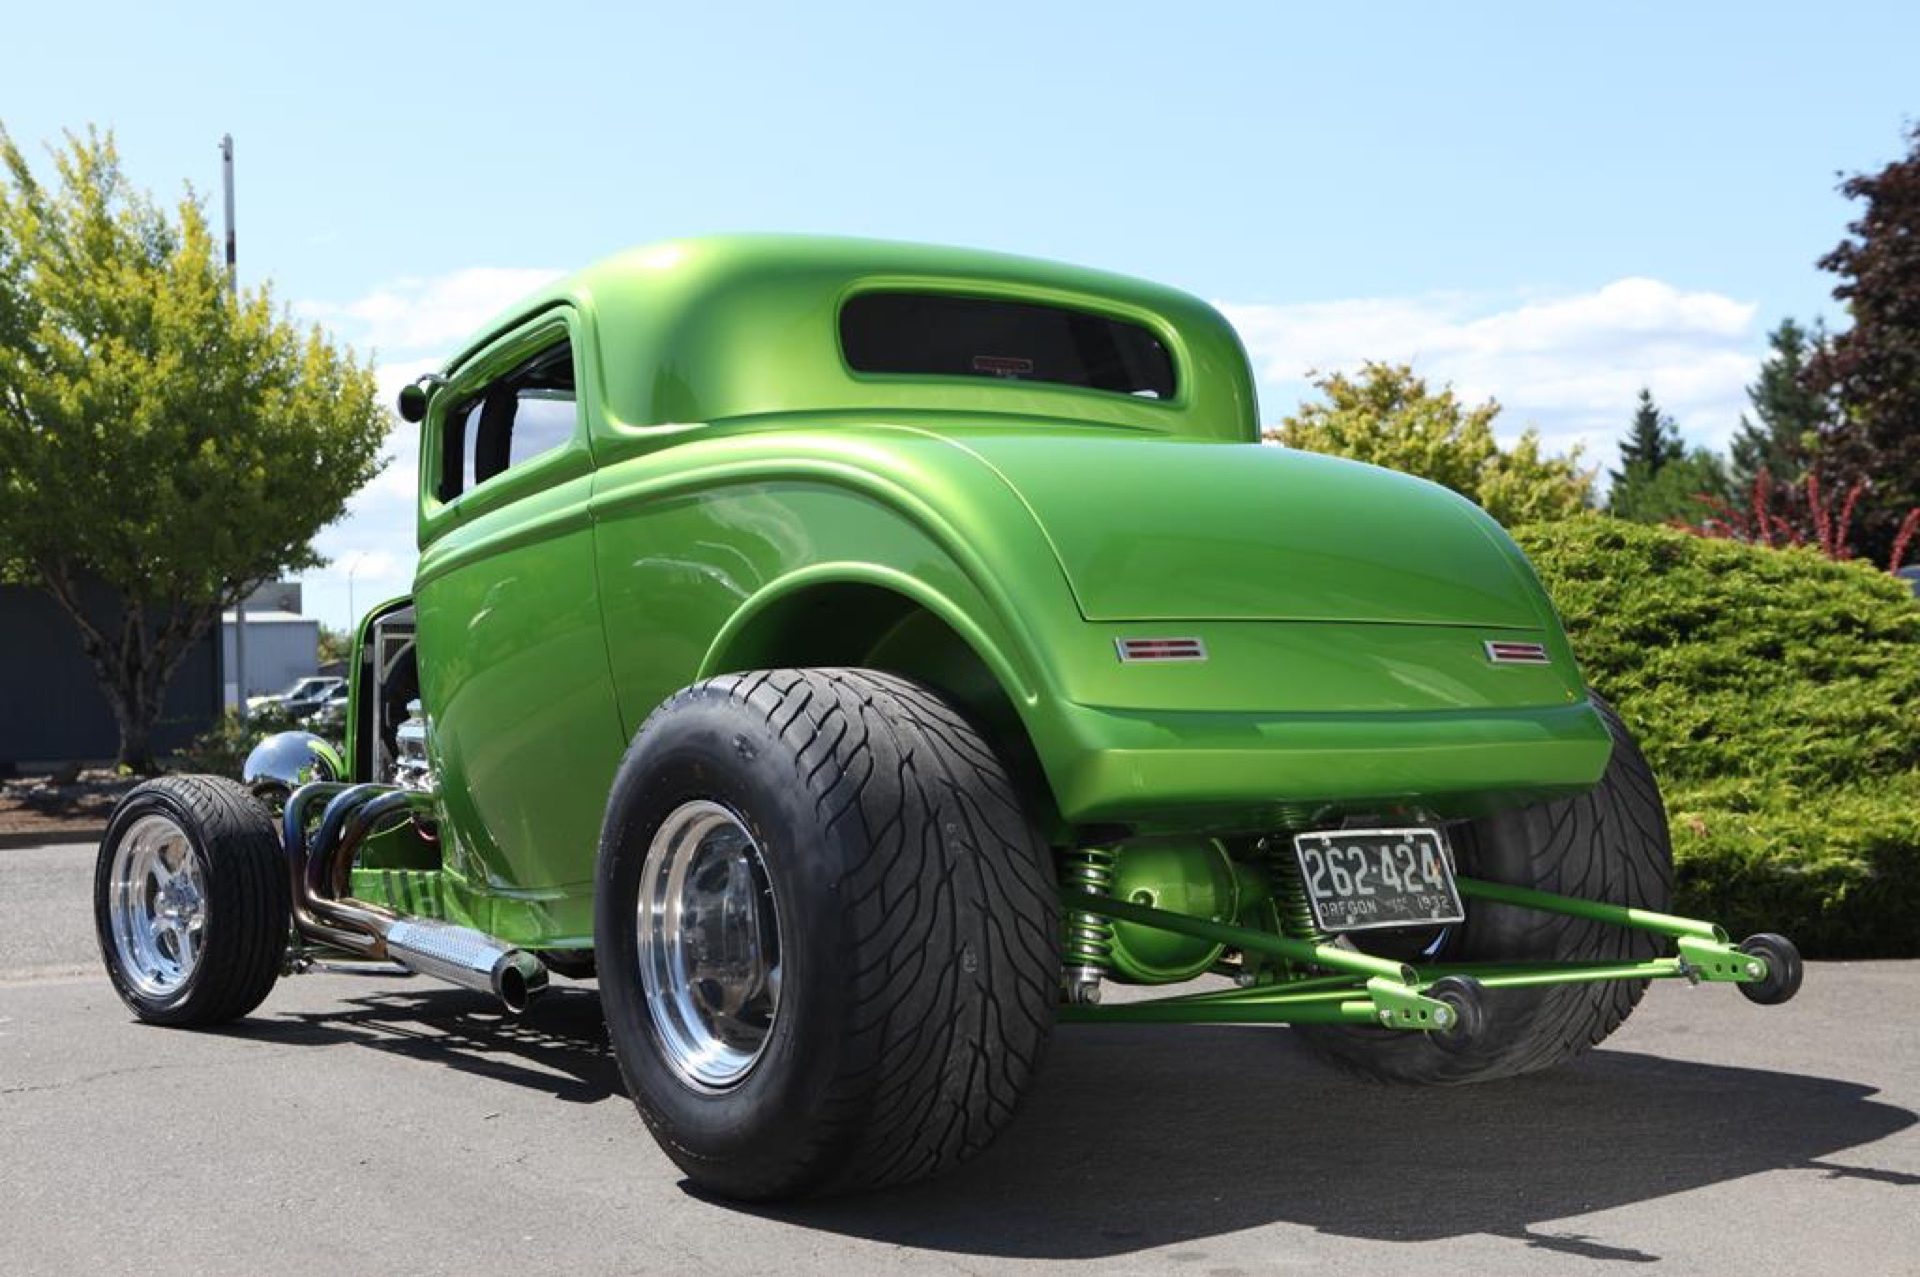 1932 Ford Coupe Metalworks Classics Auto Restoration Speed Shop Metalworks Classic Auto Restoration Speed Shop